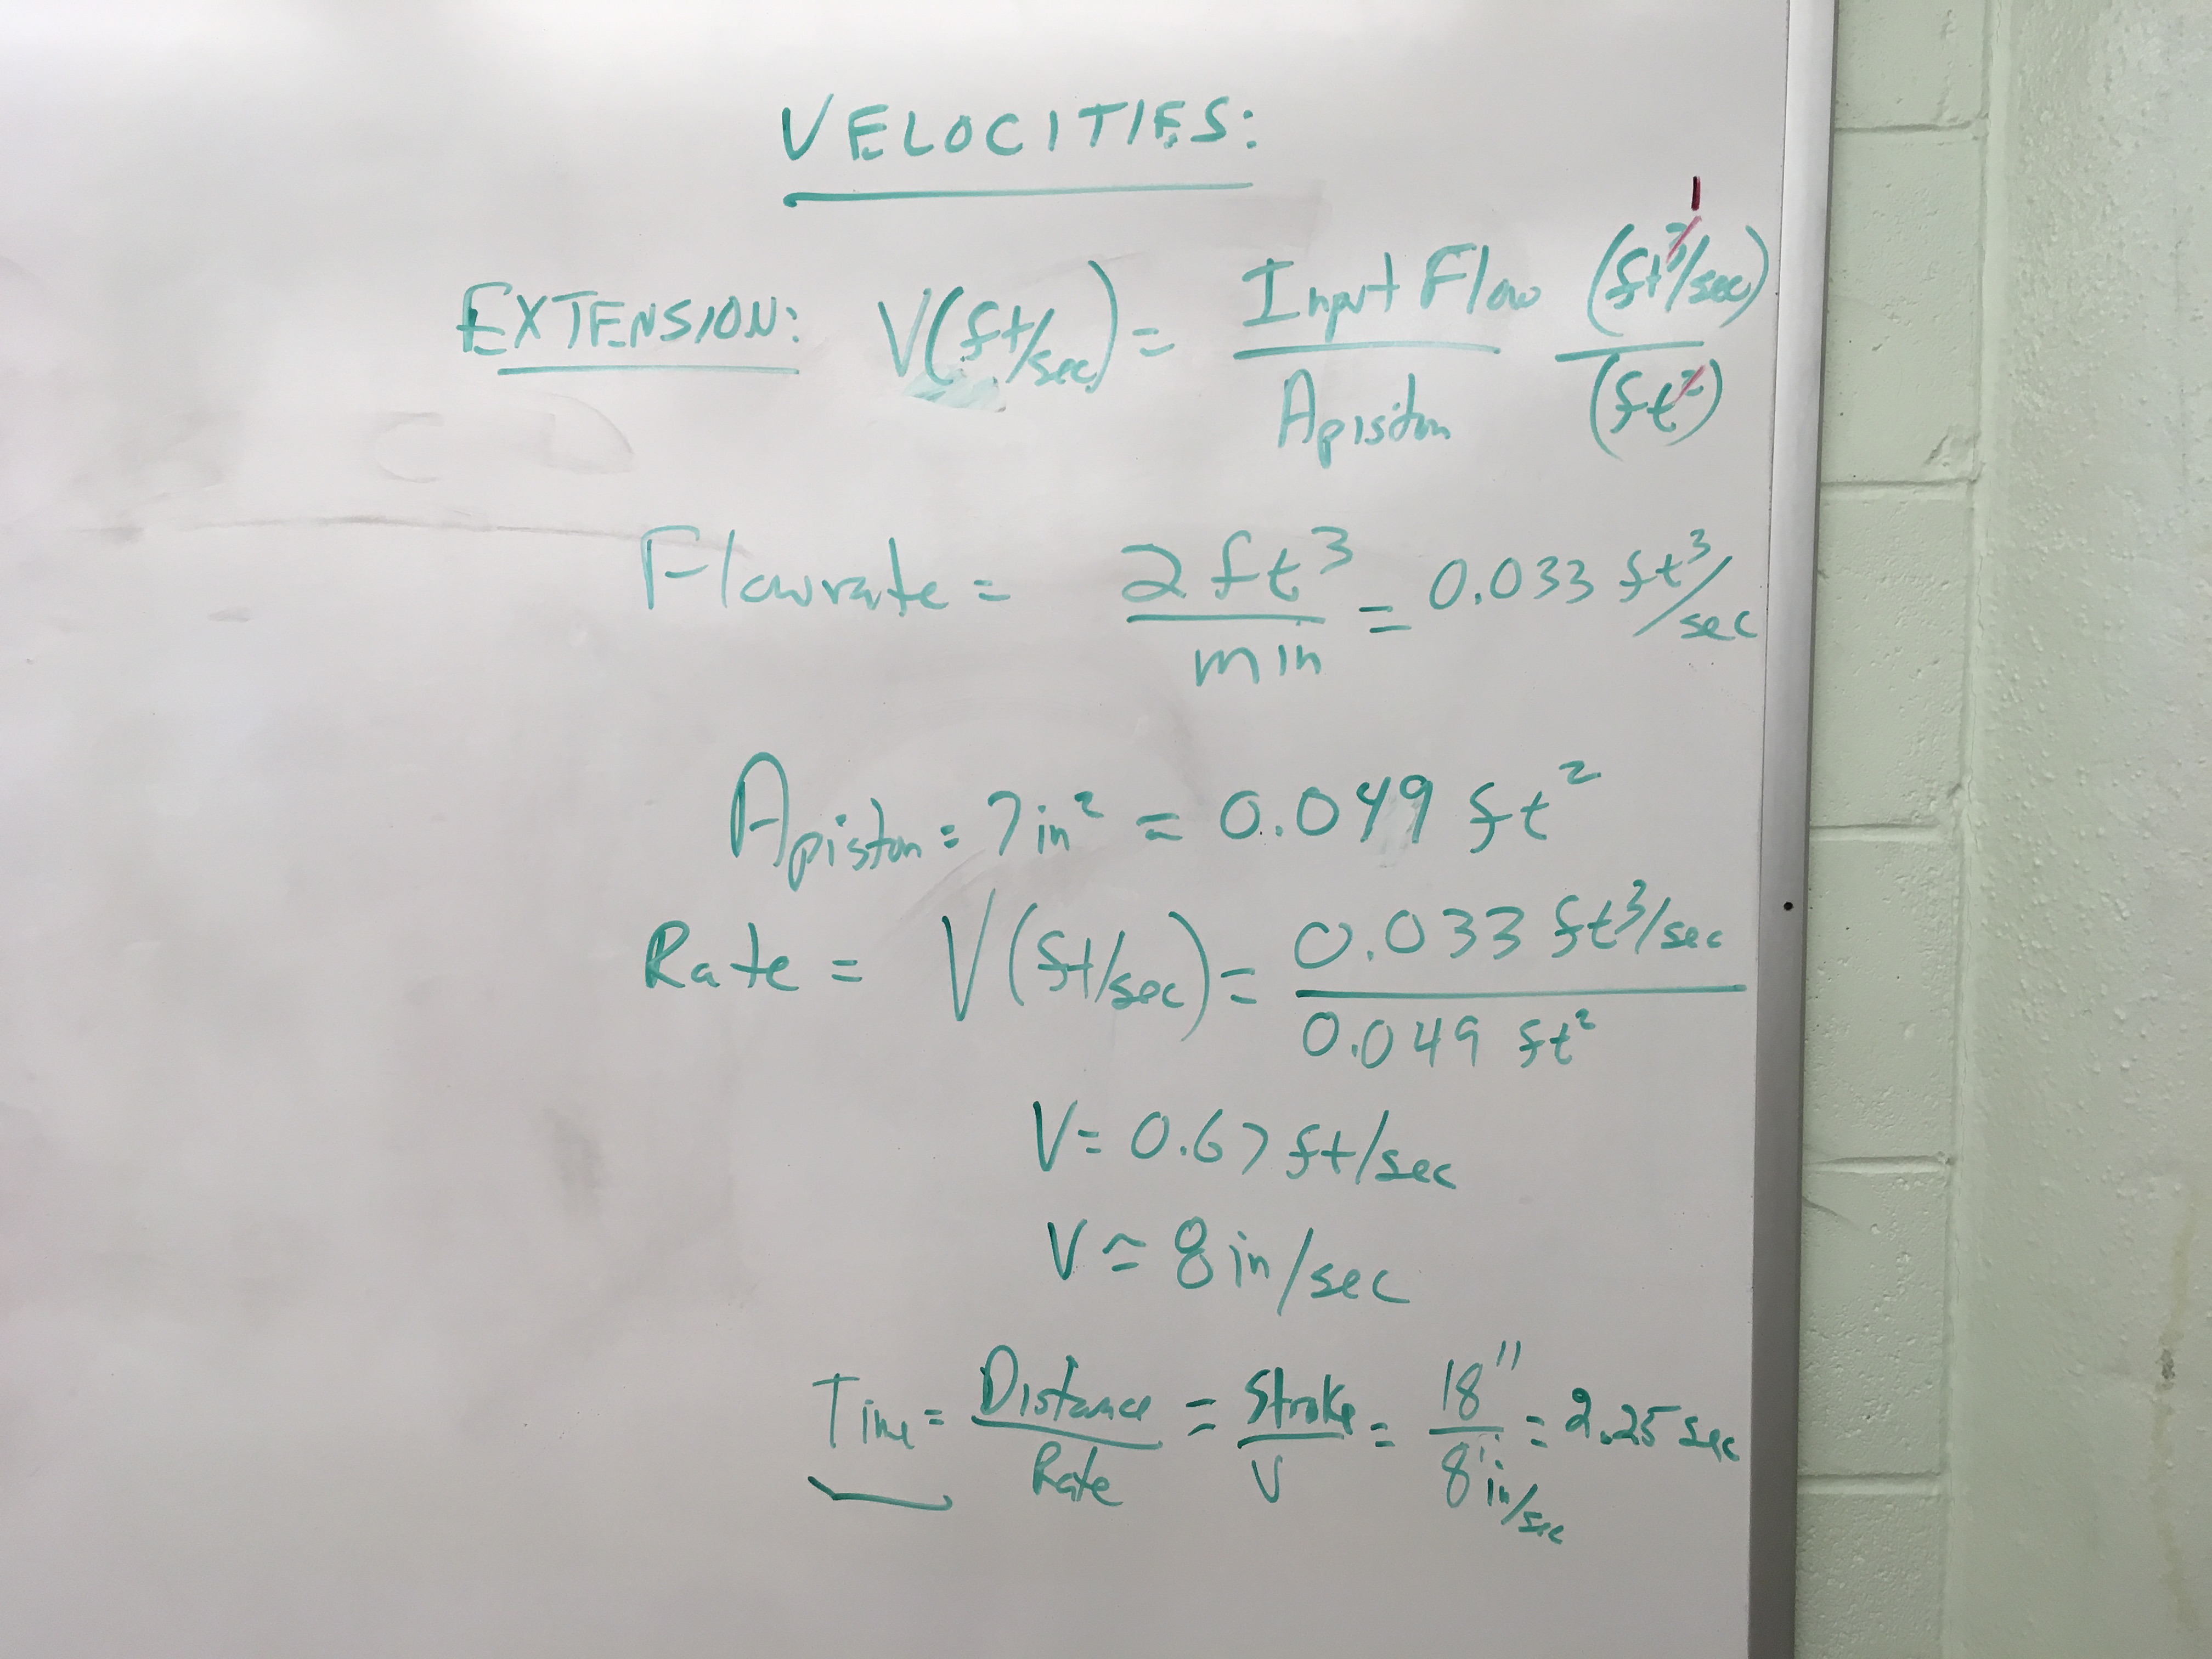 3-Velocity & Time Calculations.JPG